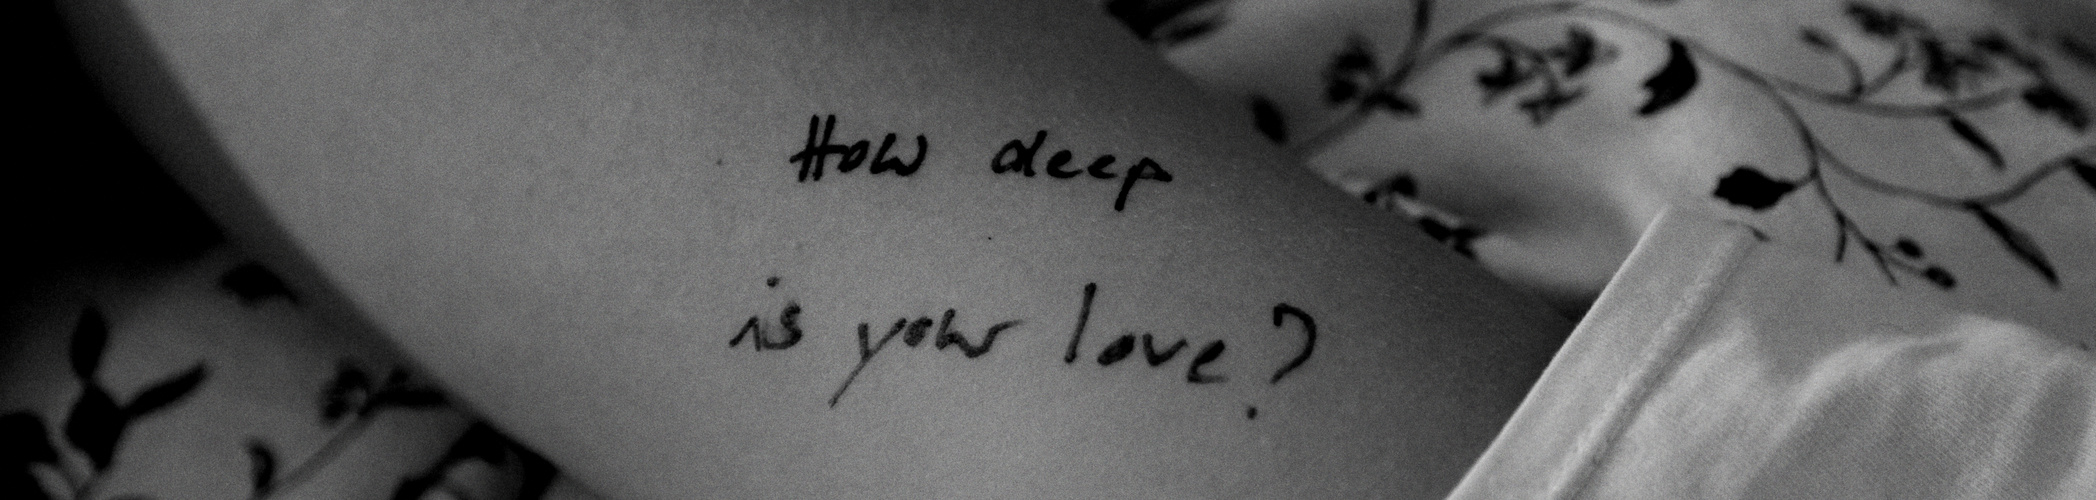 How deep is your love ?